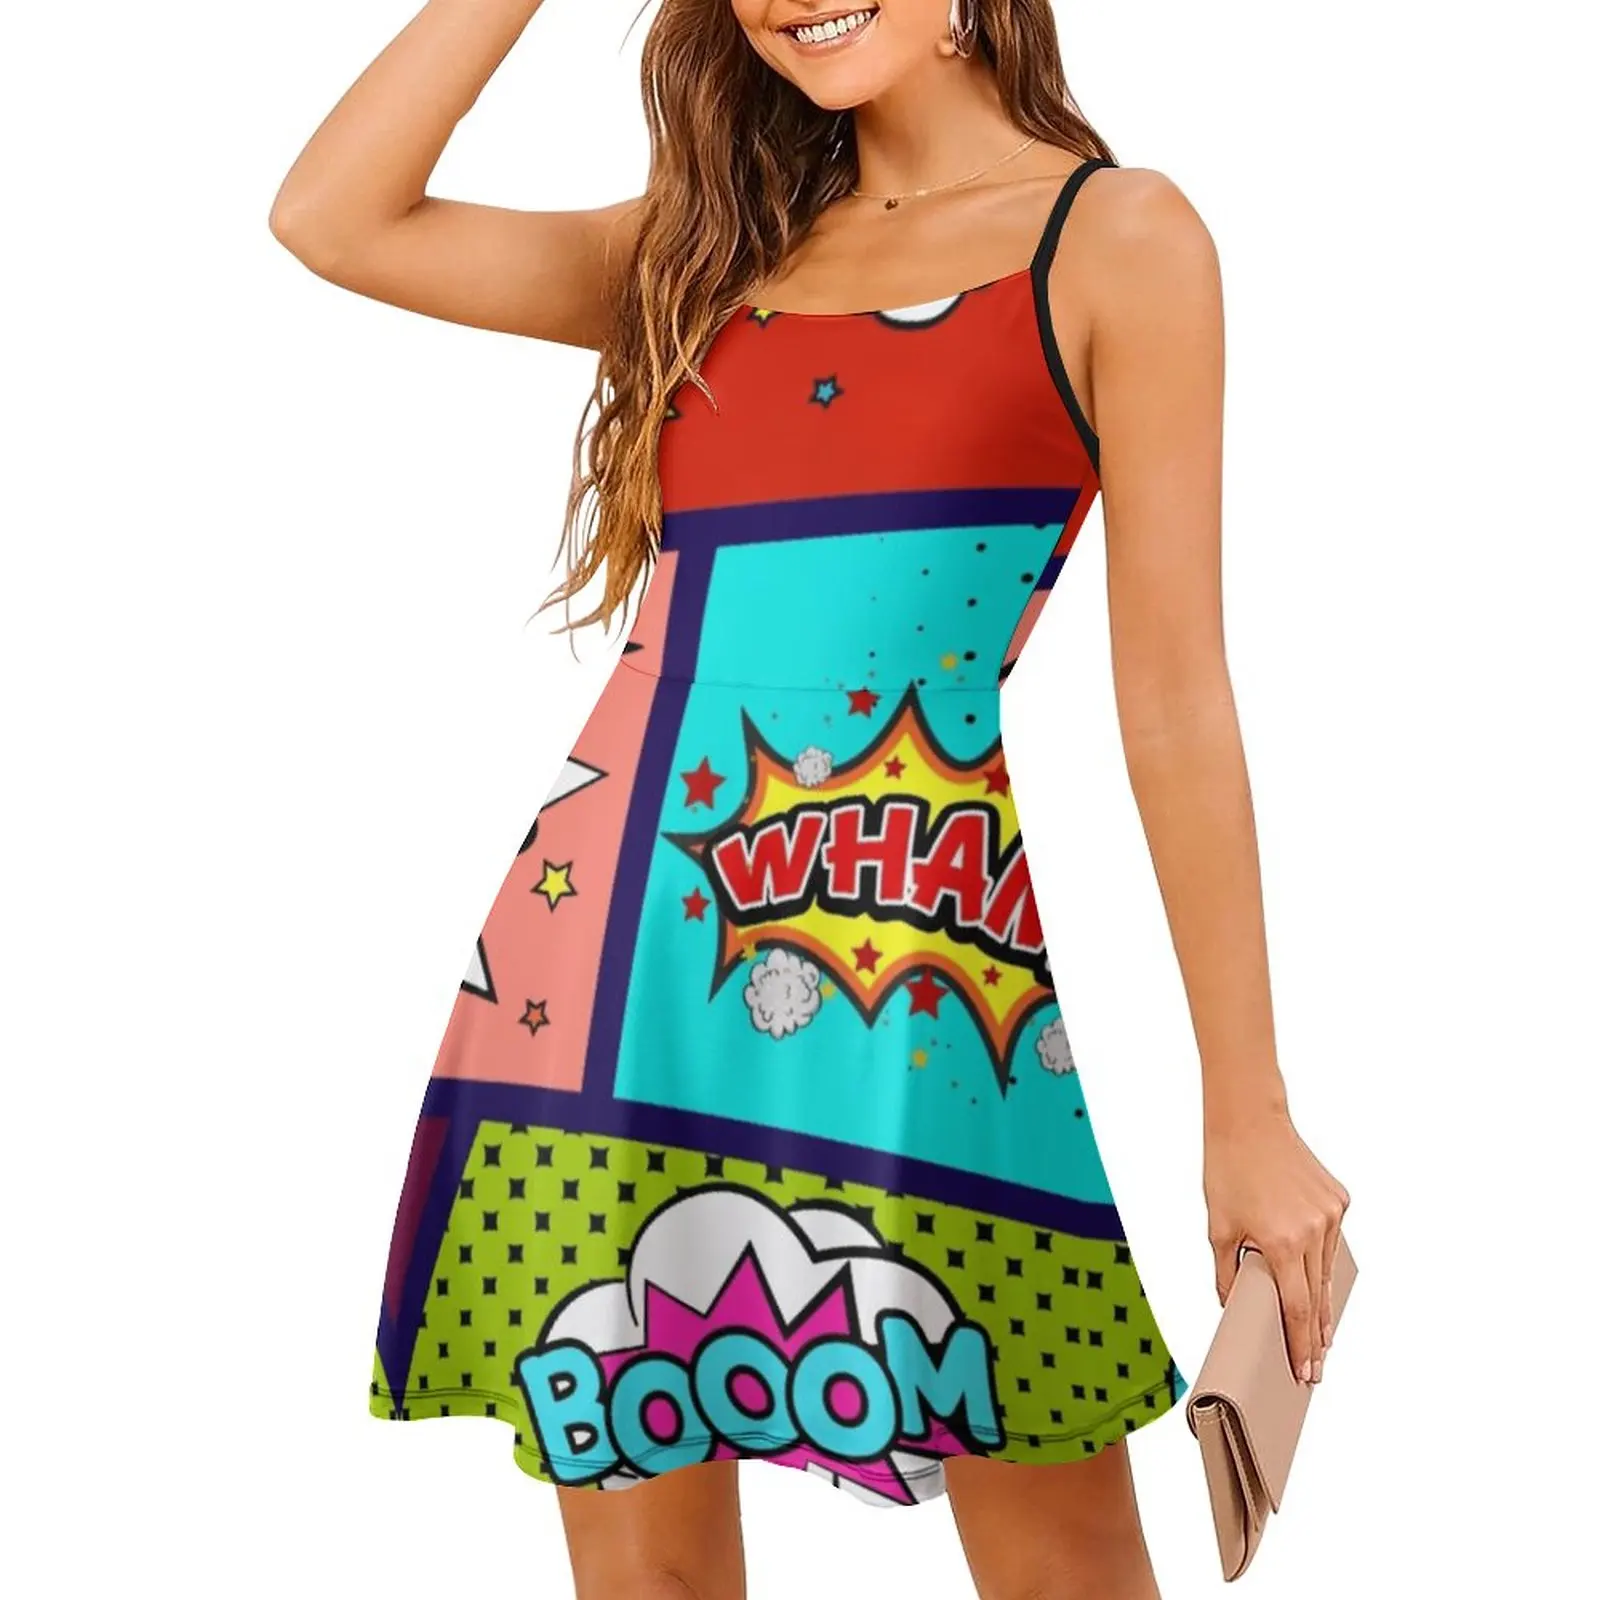 

Panels Crazy Colorful And Bright Comic Book Panels Arts-1 Novelty Sexy Woman's Gown Women's Sling Dress Nerd Cocktails Strappy